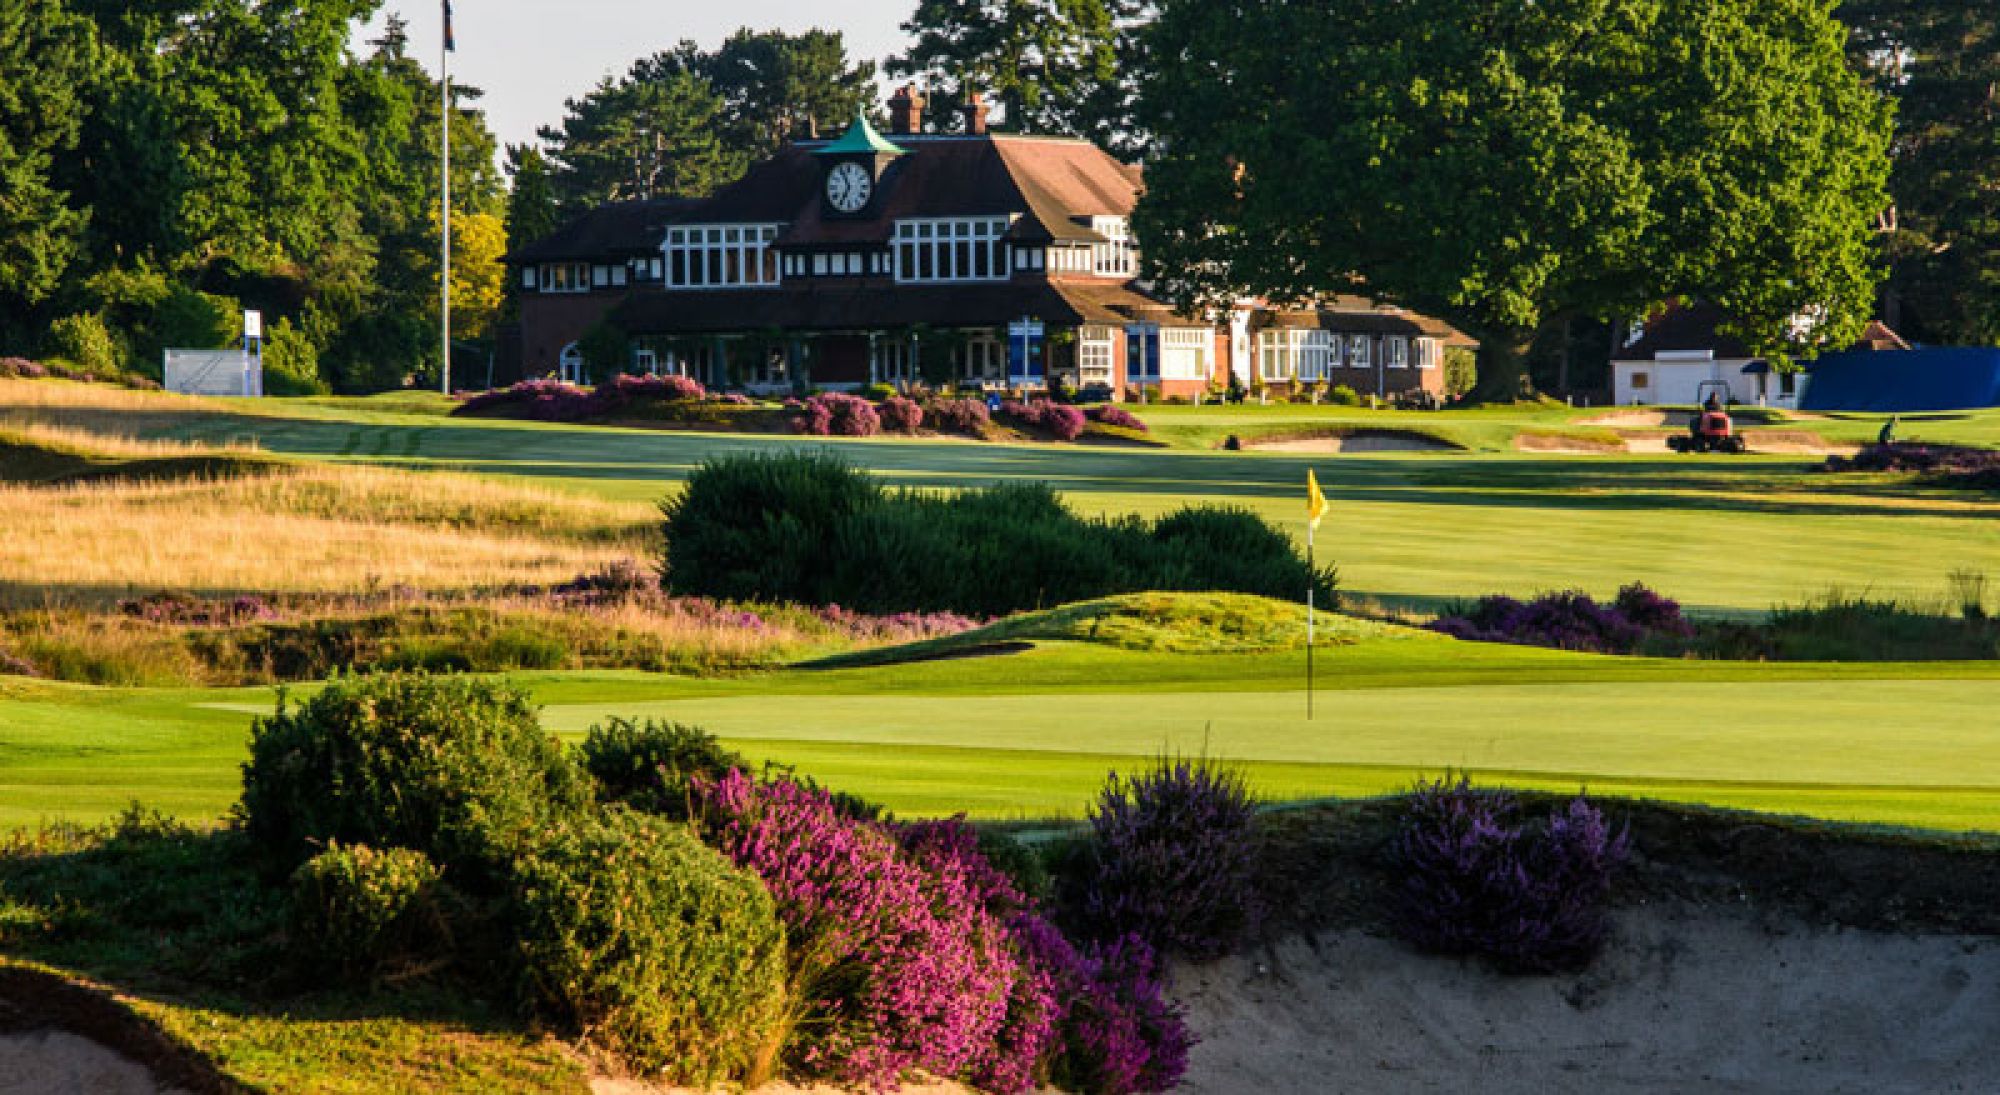 View Sunningdale Golf Club's scenic golf course situated in stunning Surrey.